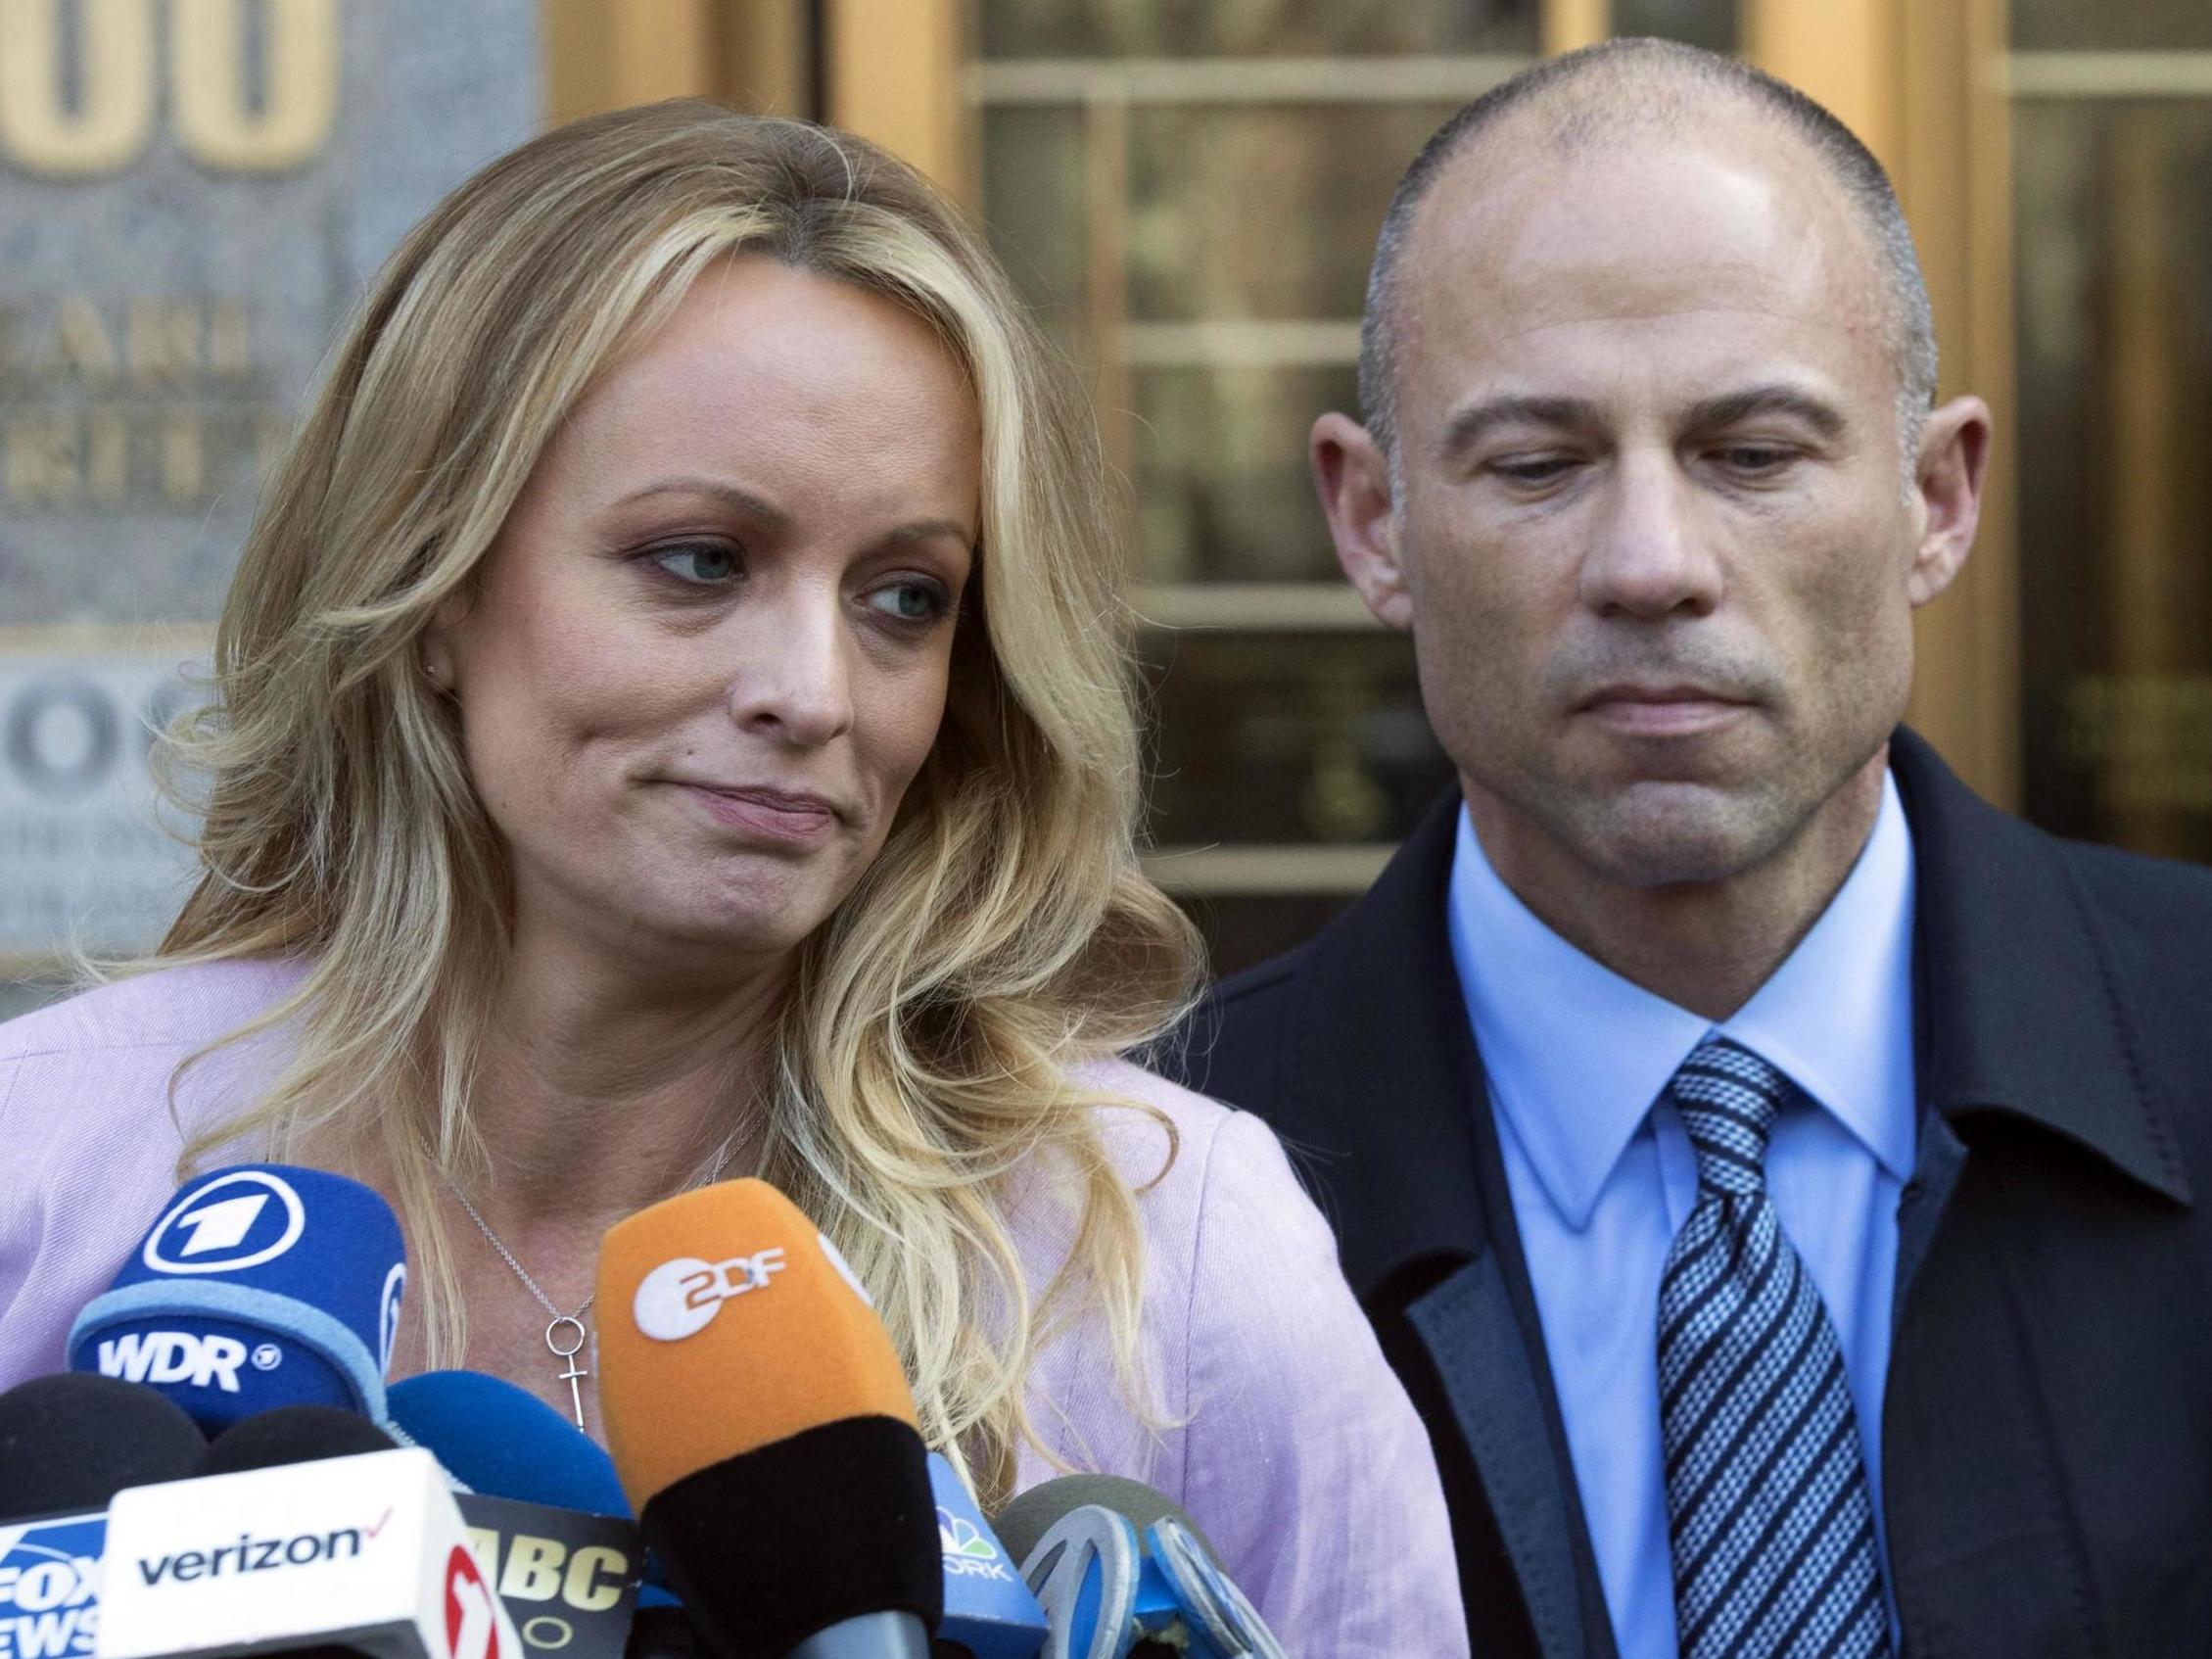 Michael Avenatti: Stormy Daniels’ former lawyer arrested in California | The Independent2500 x 1717